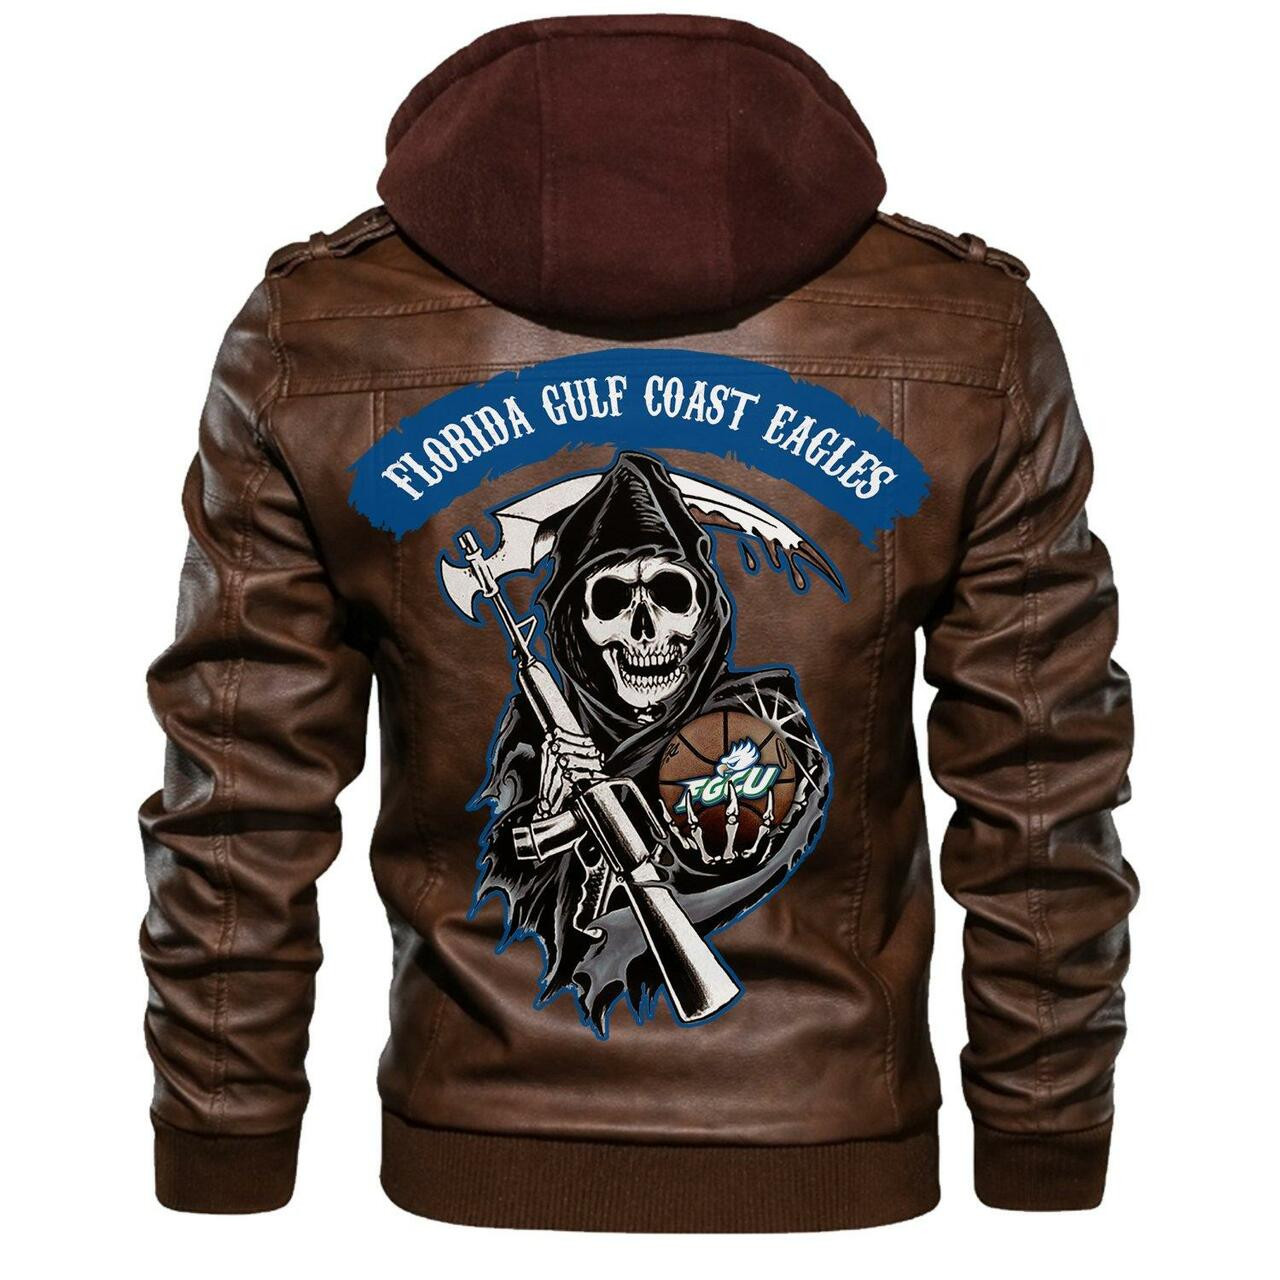 Check out and find the right leather jacket below 74